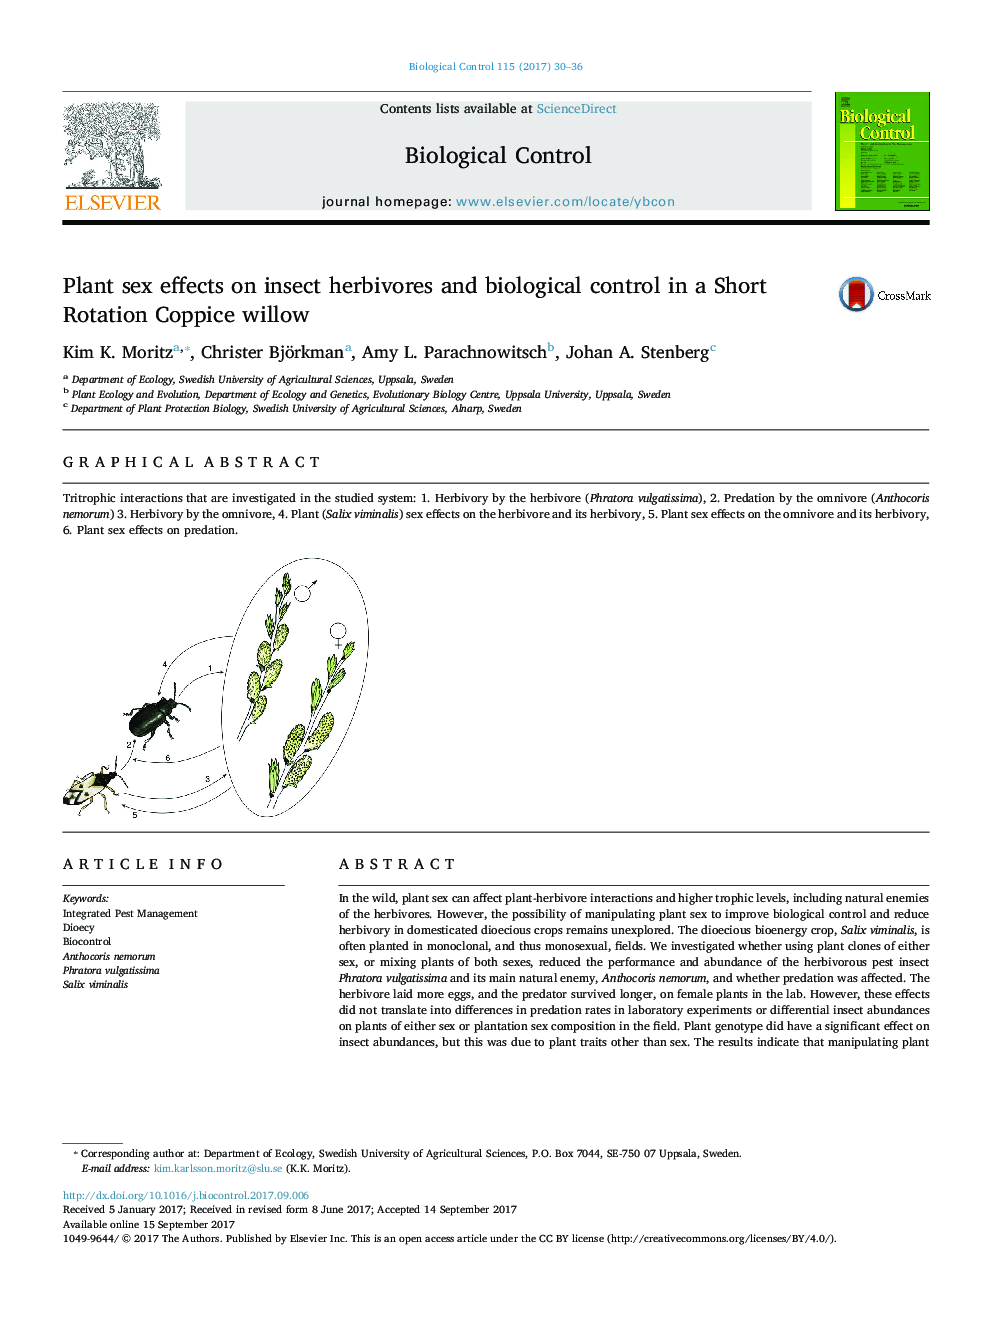 Plant sex effects on insect herbivores and biological control in a Short Rotation Coppice willow